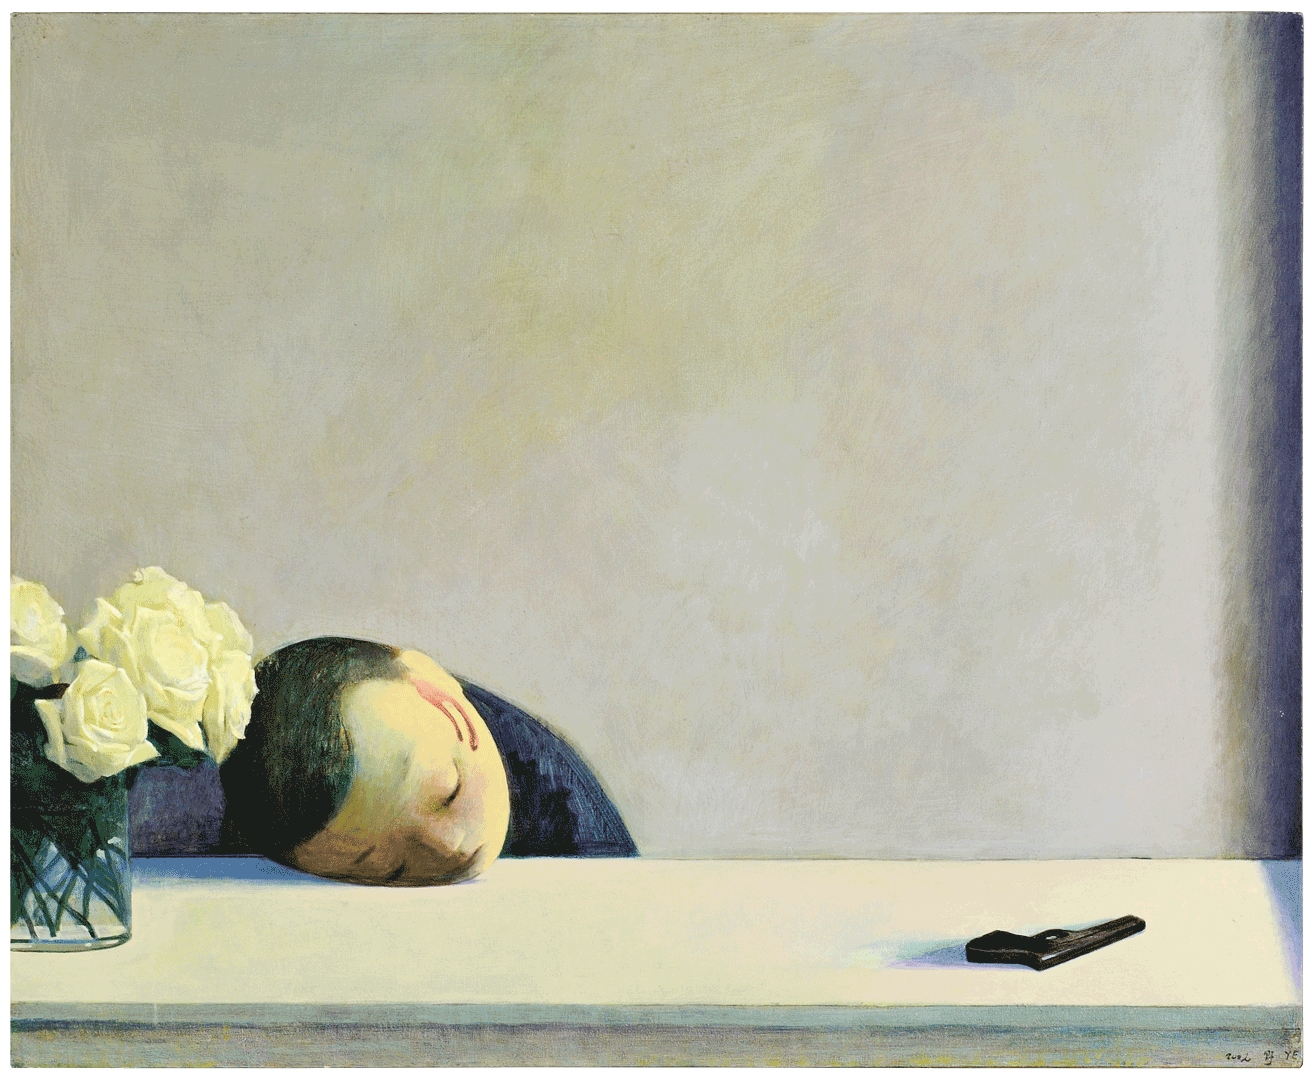 A painting by Liu Ye, titled Romeo, dated 2002.